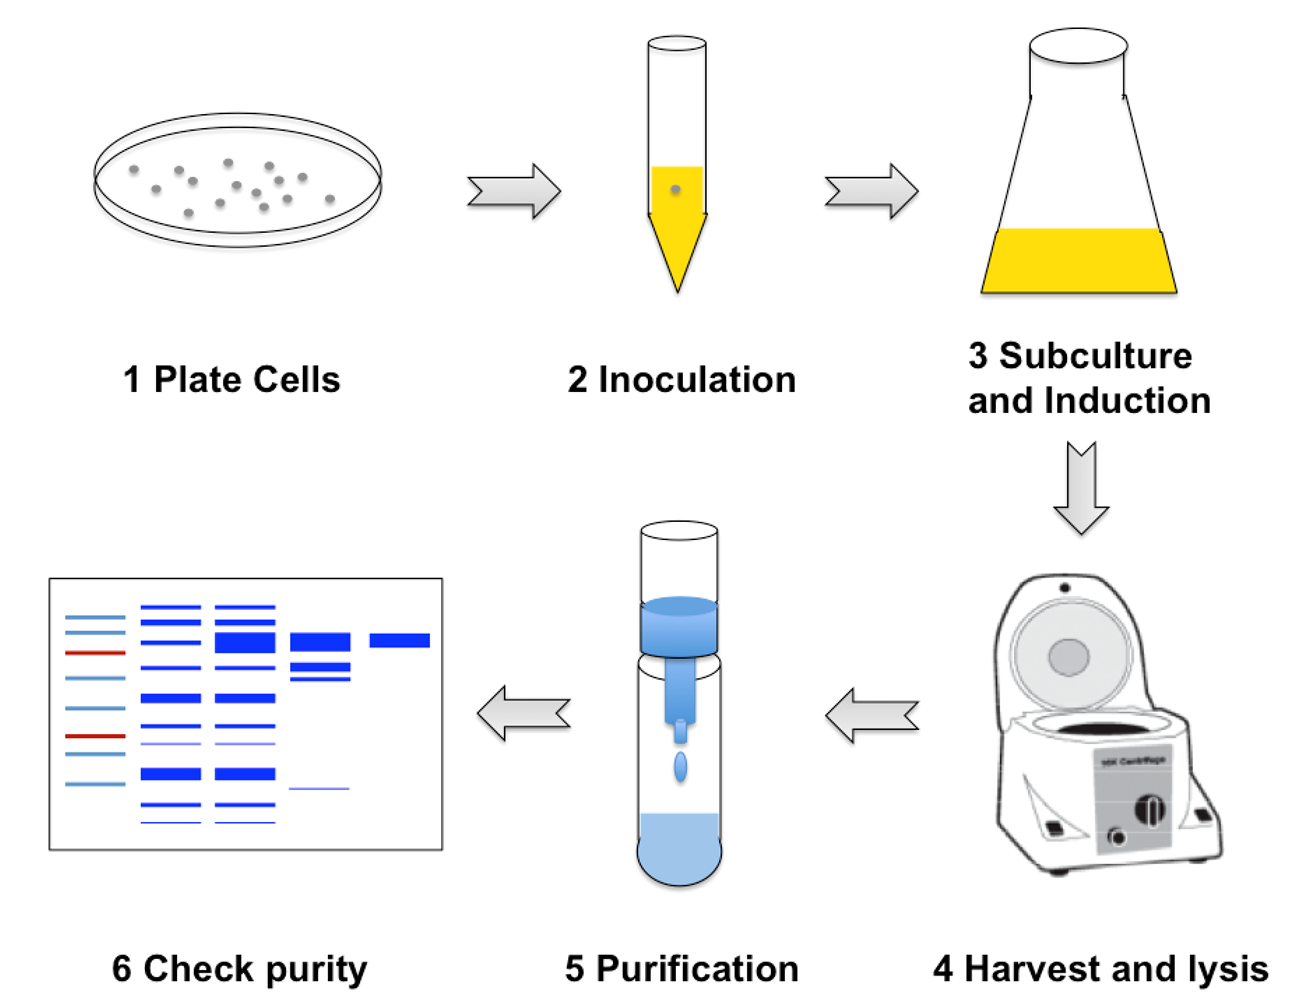 Overview of our Biochemistry module - protein expression and purification.